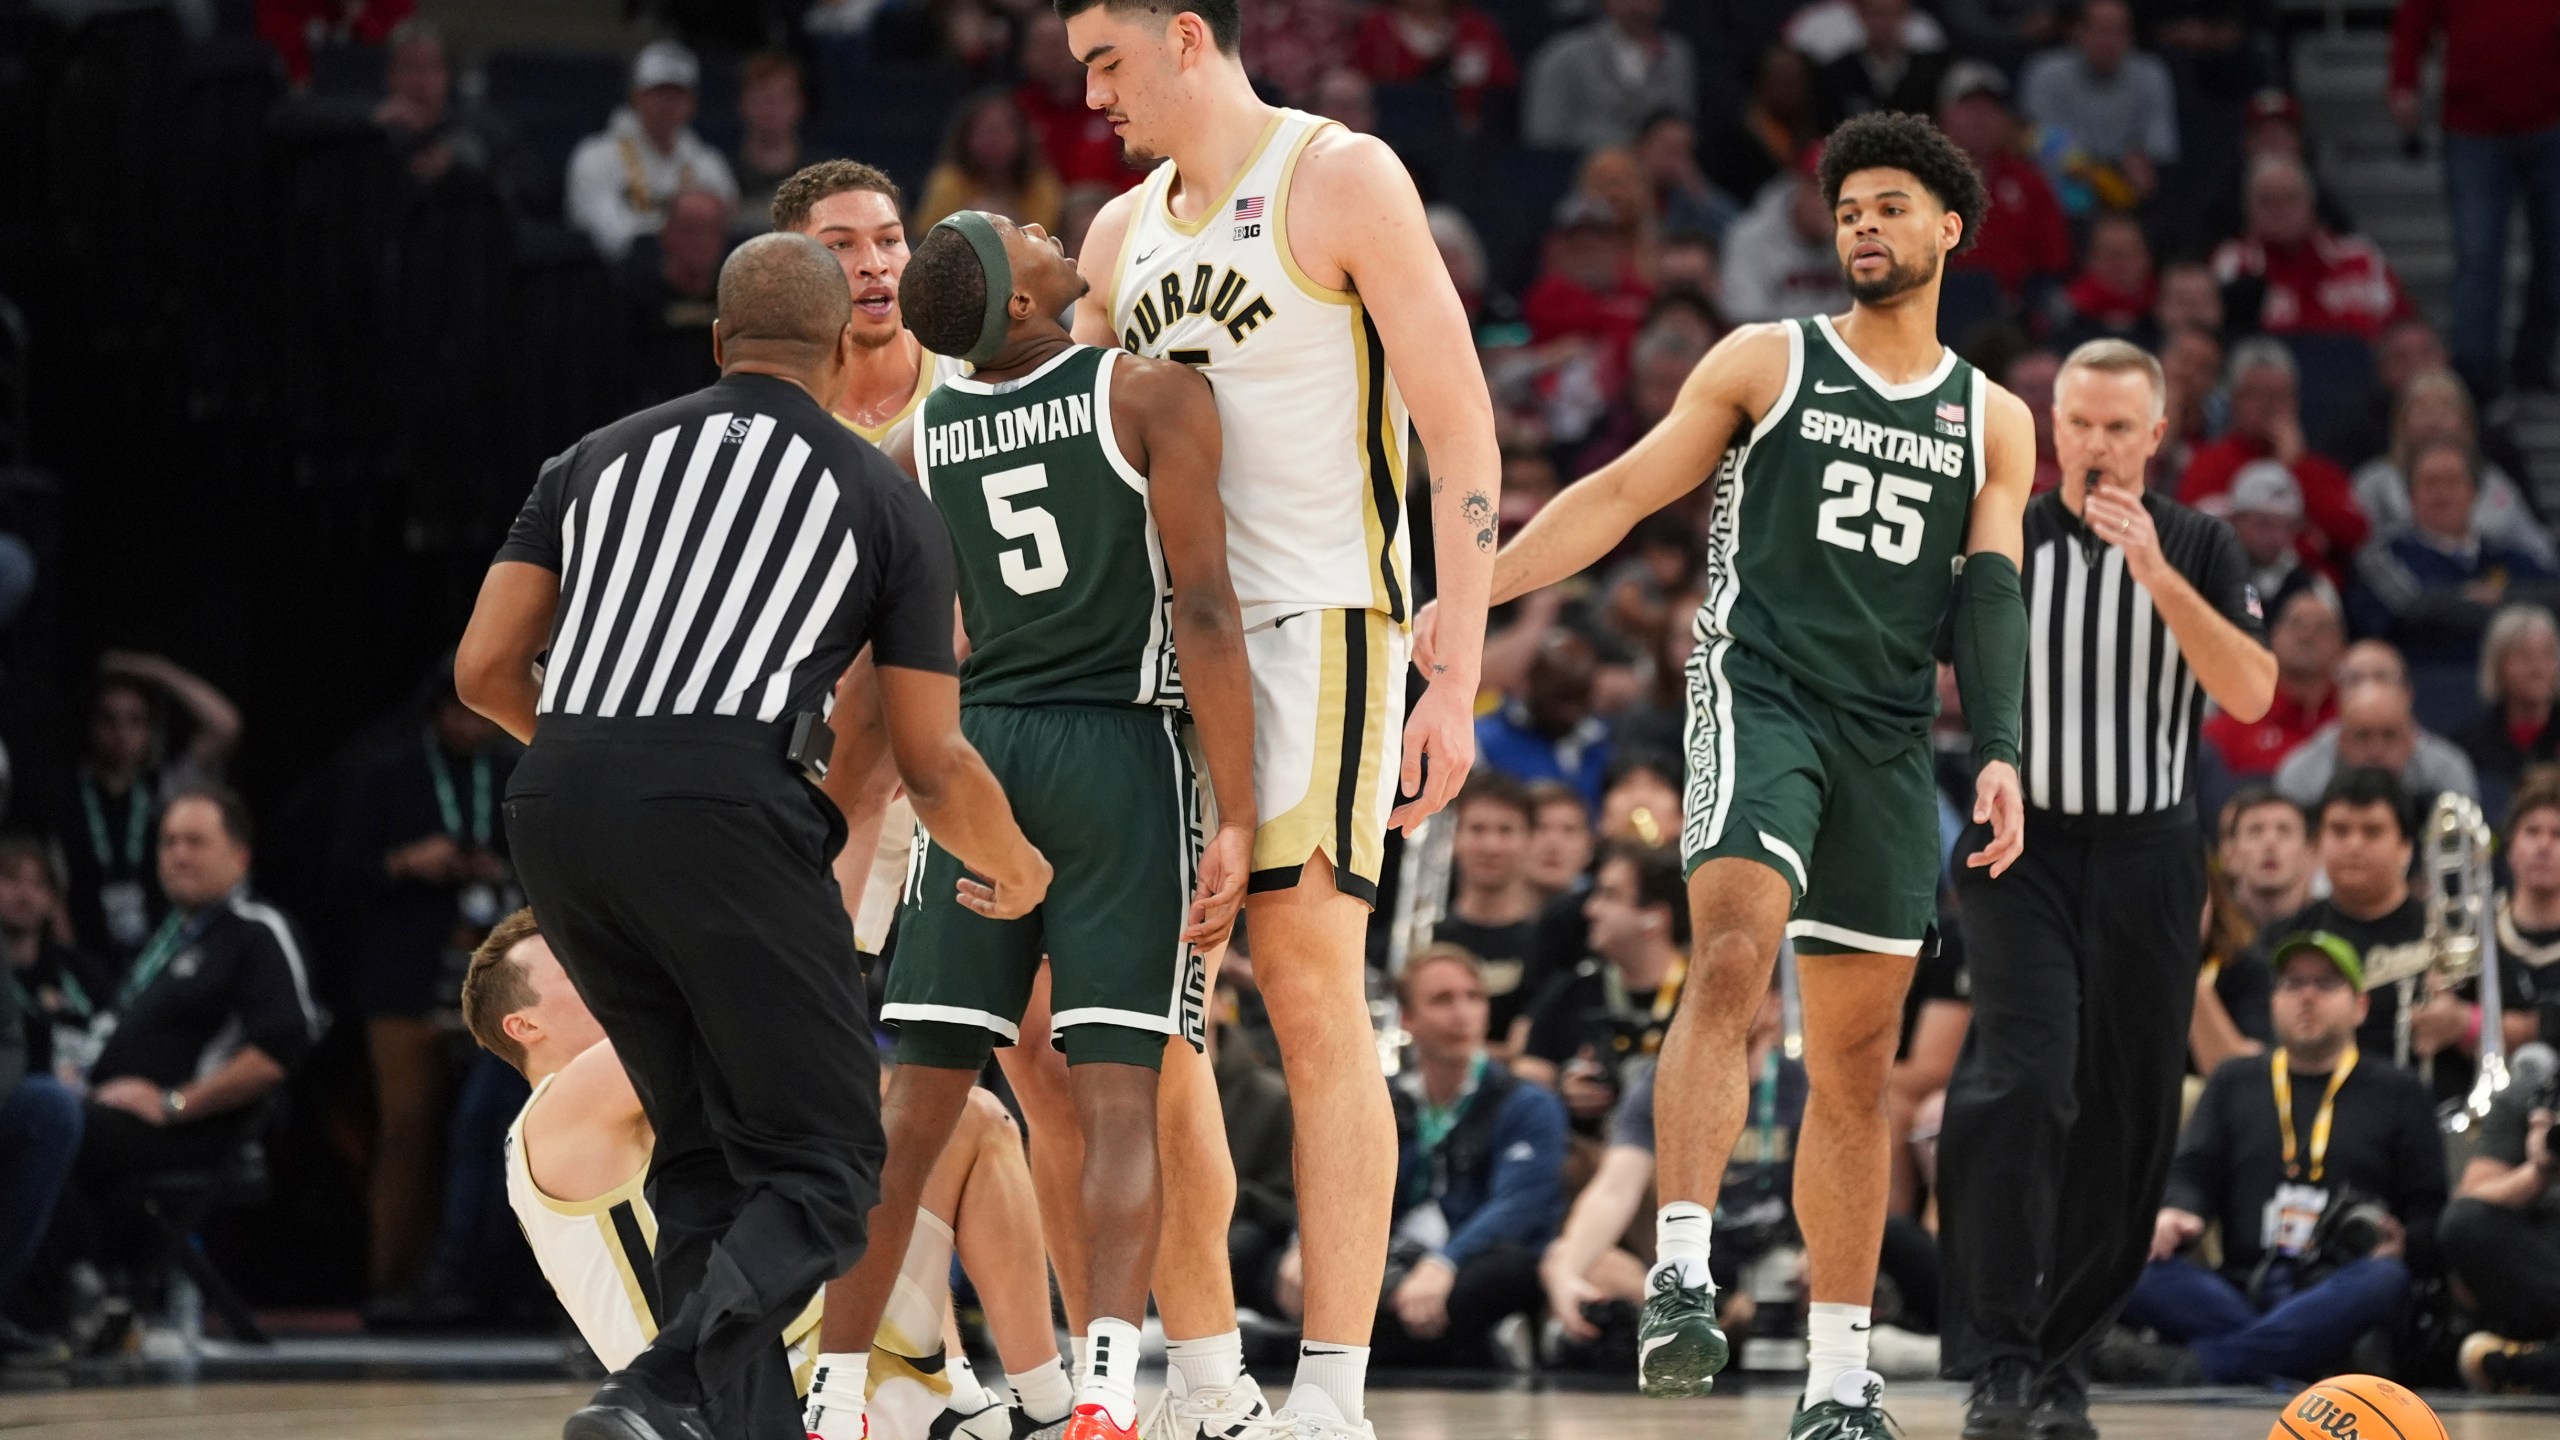 Michigan State guard Tre Holloman (5) and Purdue center Zach Edey, center, get into an altercation during the second half of an NCAA college basketball game in the quarterfinal round of the Big Ten Conference tournament, Friday, March 15, 2024, in Minneapolis. (AP Photo/Abbie Parr)